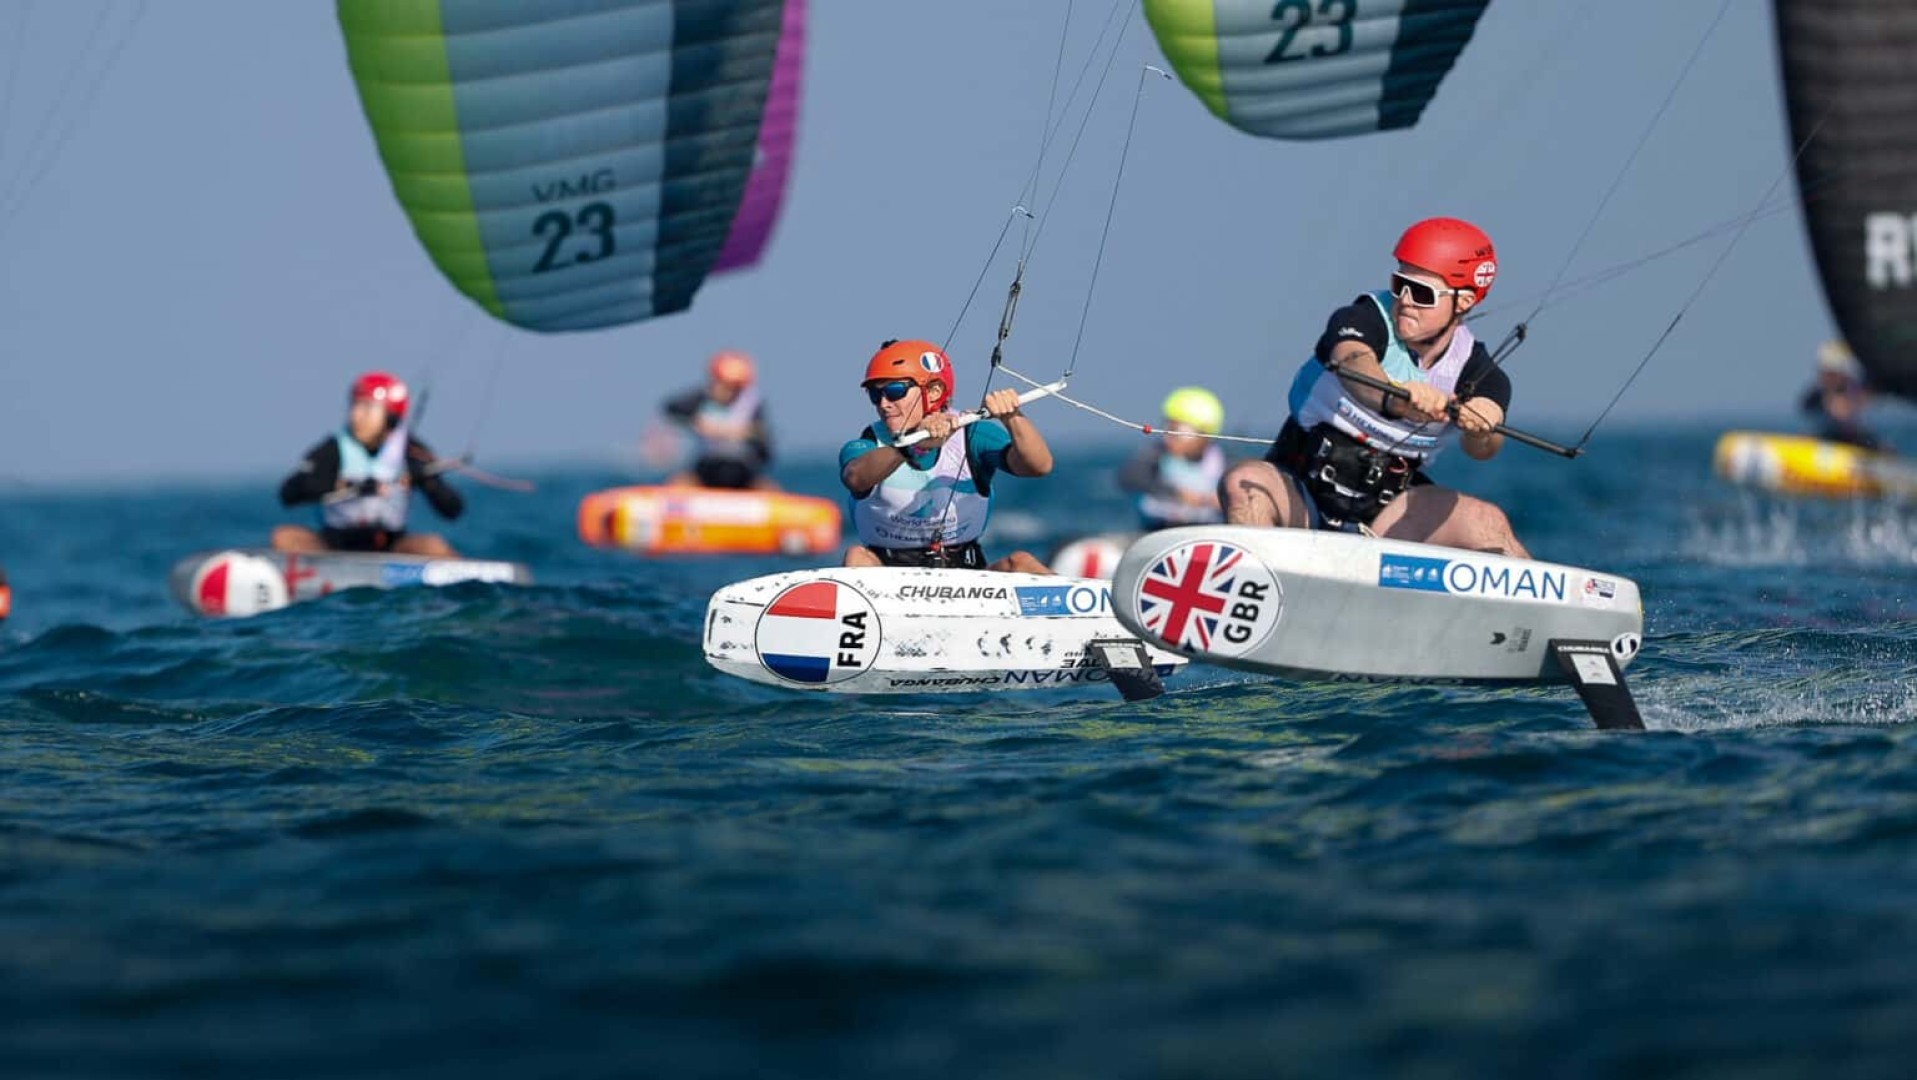 Foiling windsurfing join the Youth Worlds for the first time